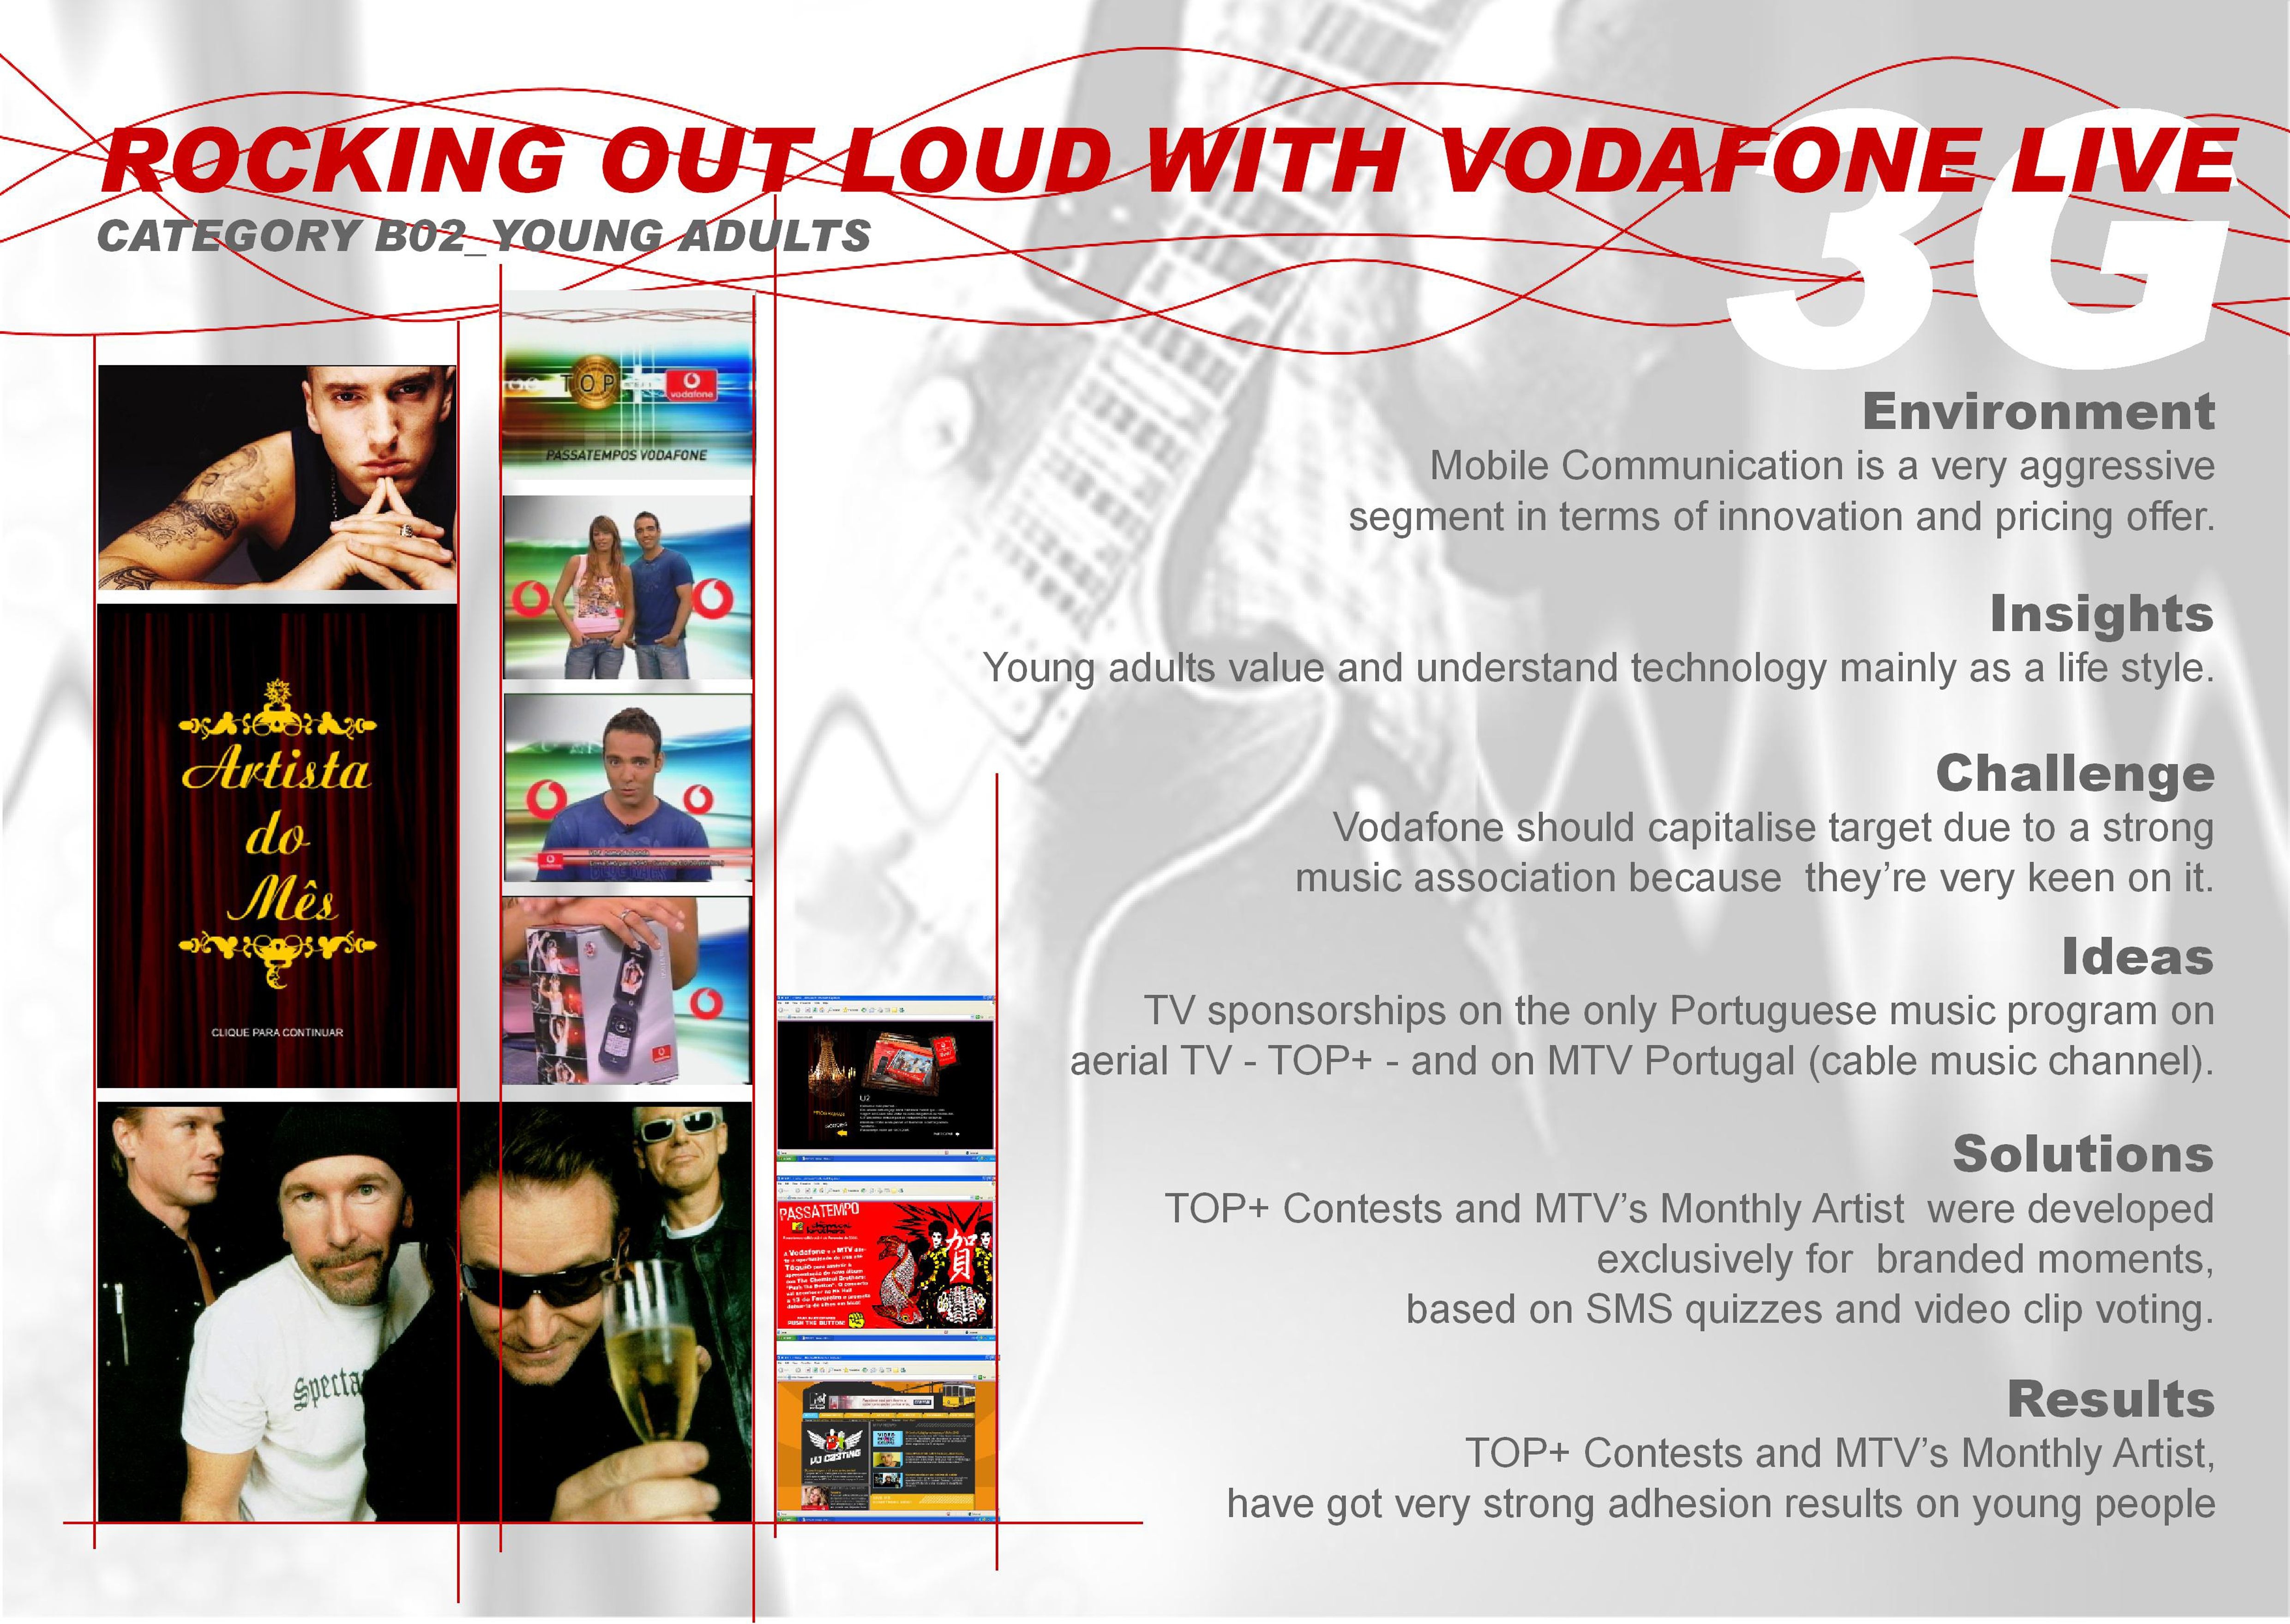 ROCKING OUT LOUD WITH VODAFONE LIVE 3G